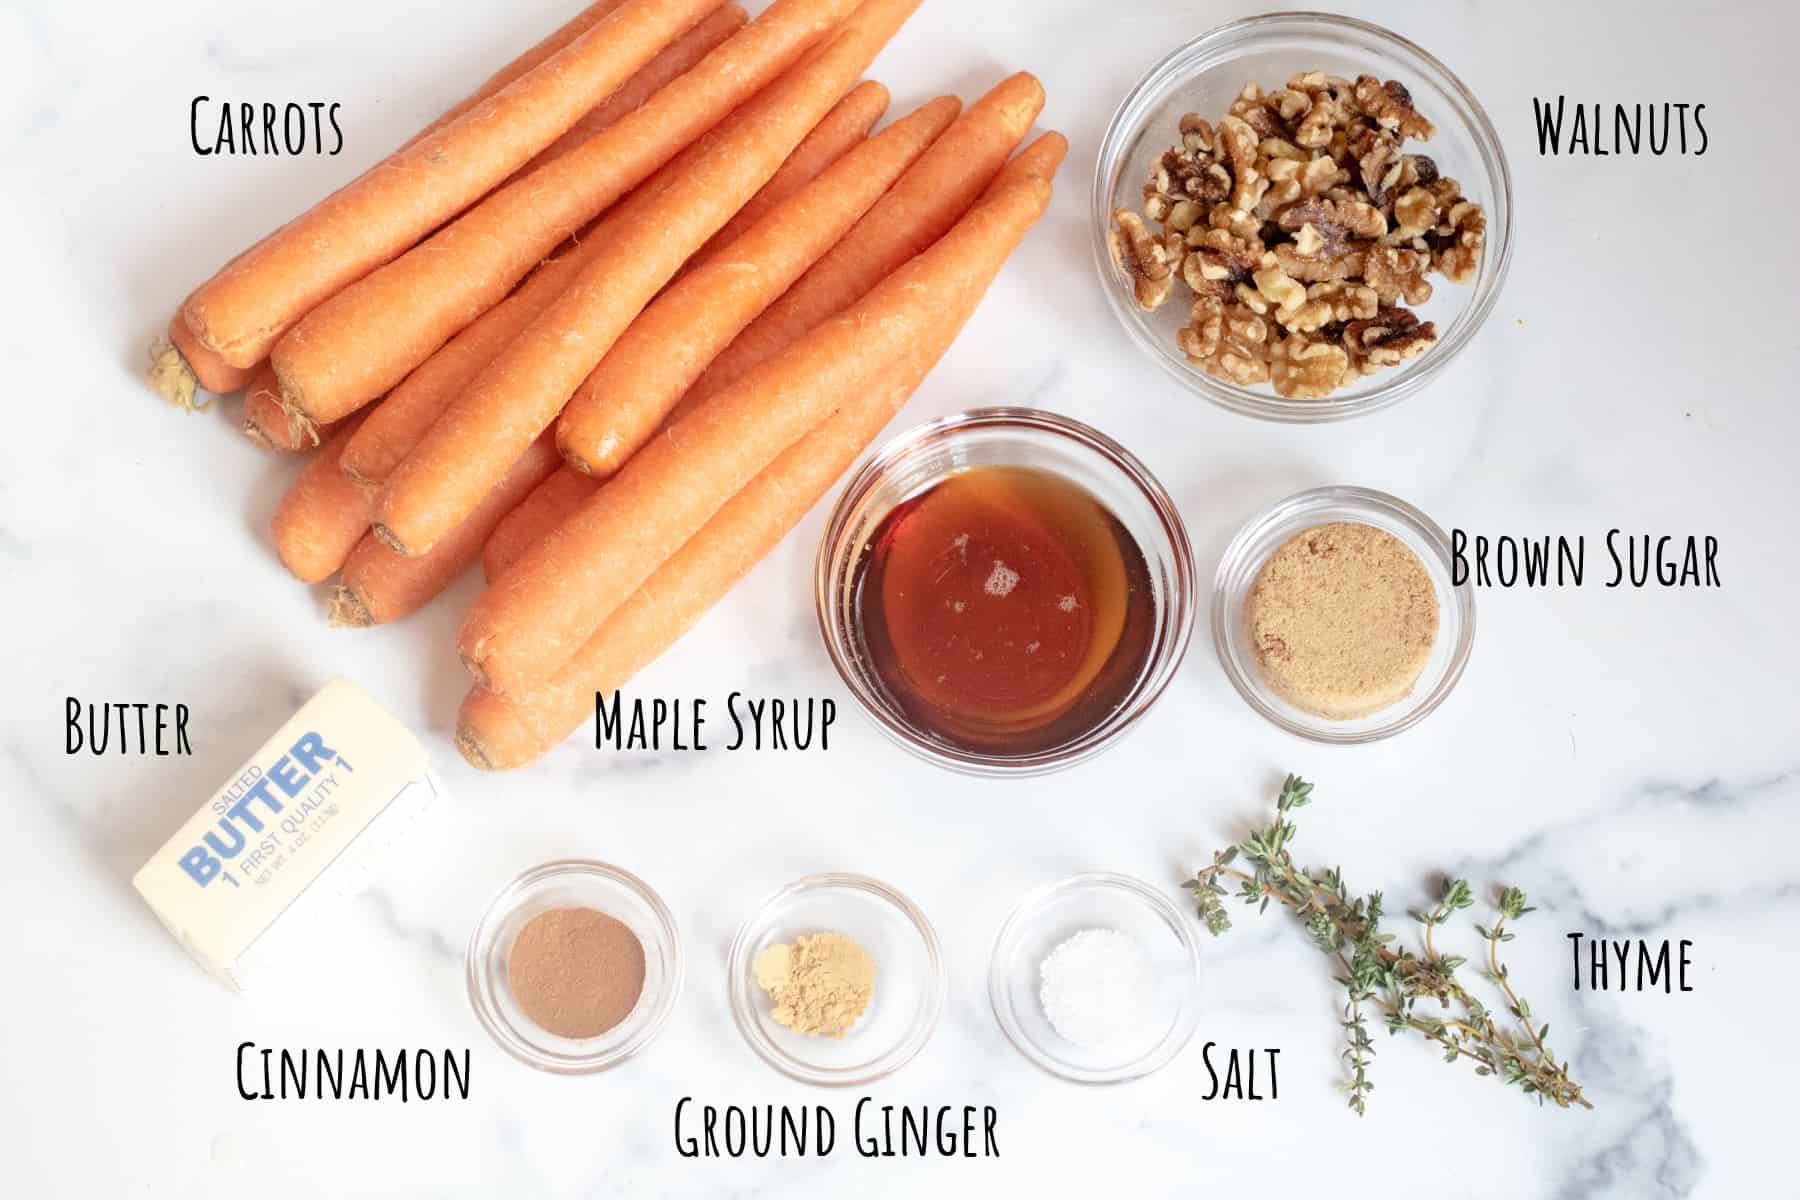 carrots, walnuts, butter, maple syrup, sugar, cinnamon, ginger, salt, and thyme.